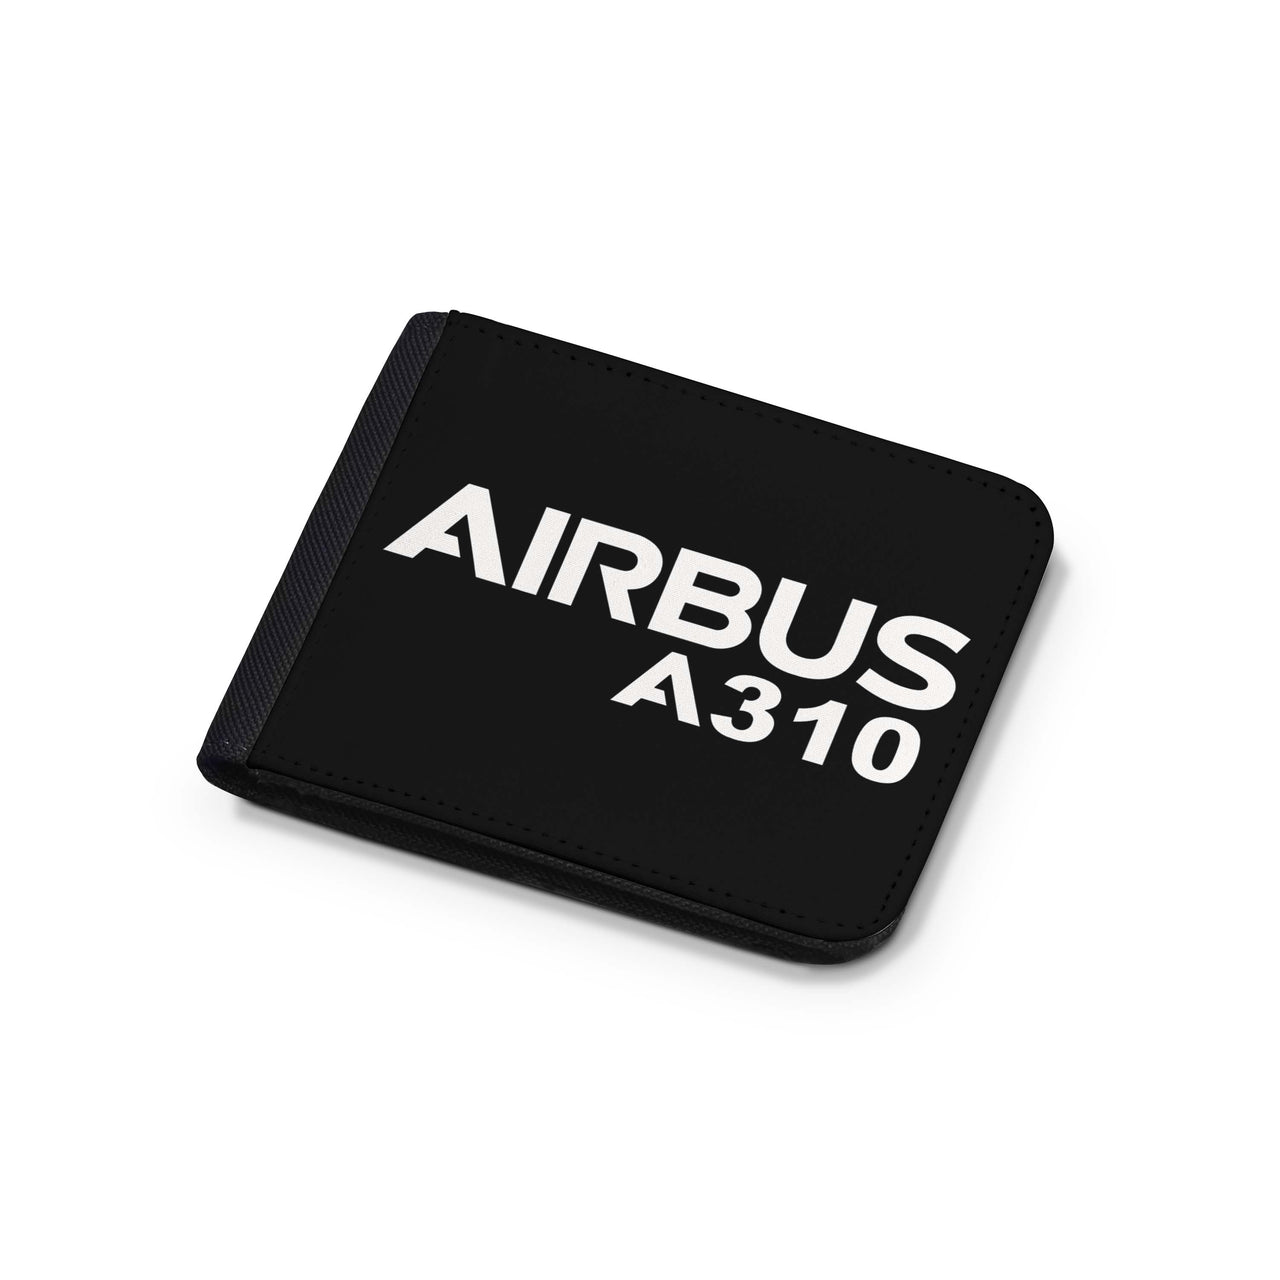 Airbus A310 & Text Designed Wallets